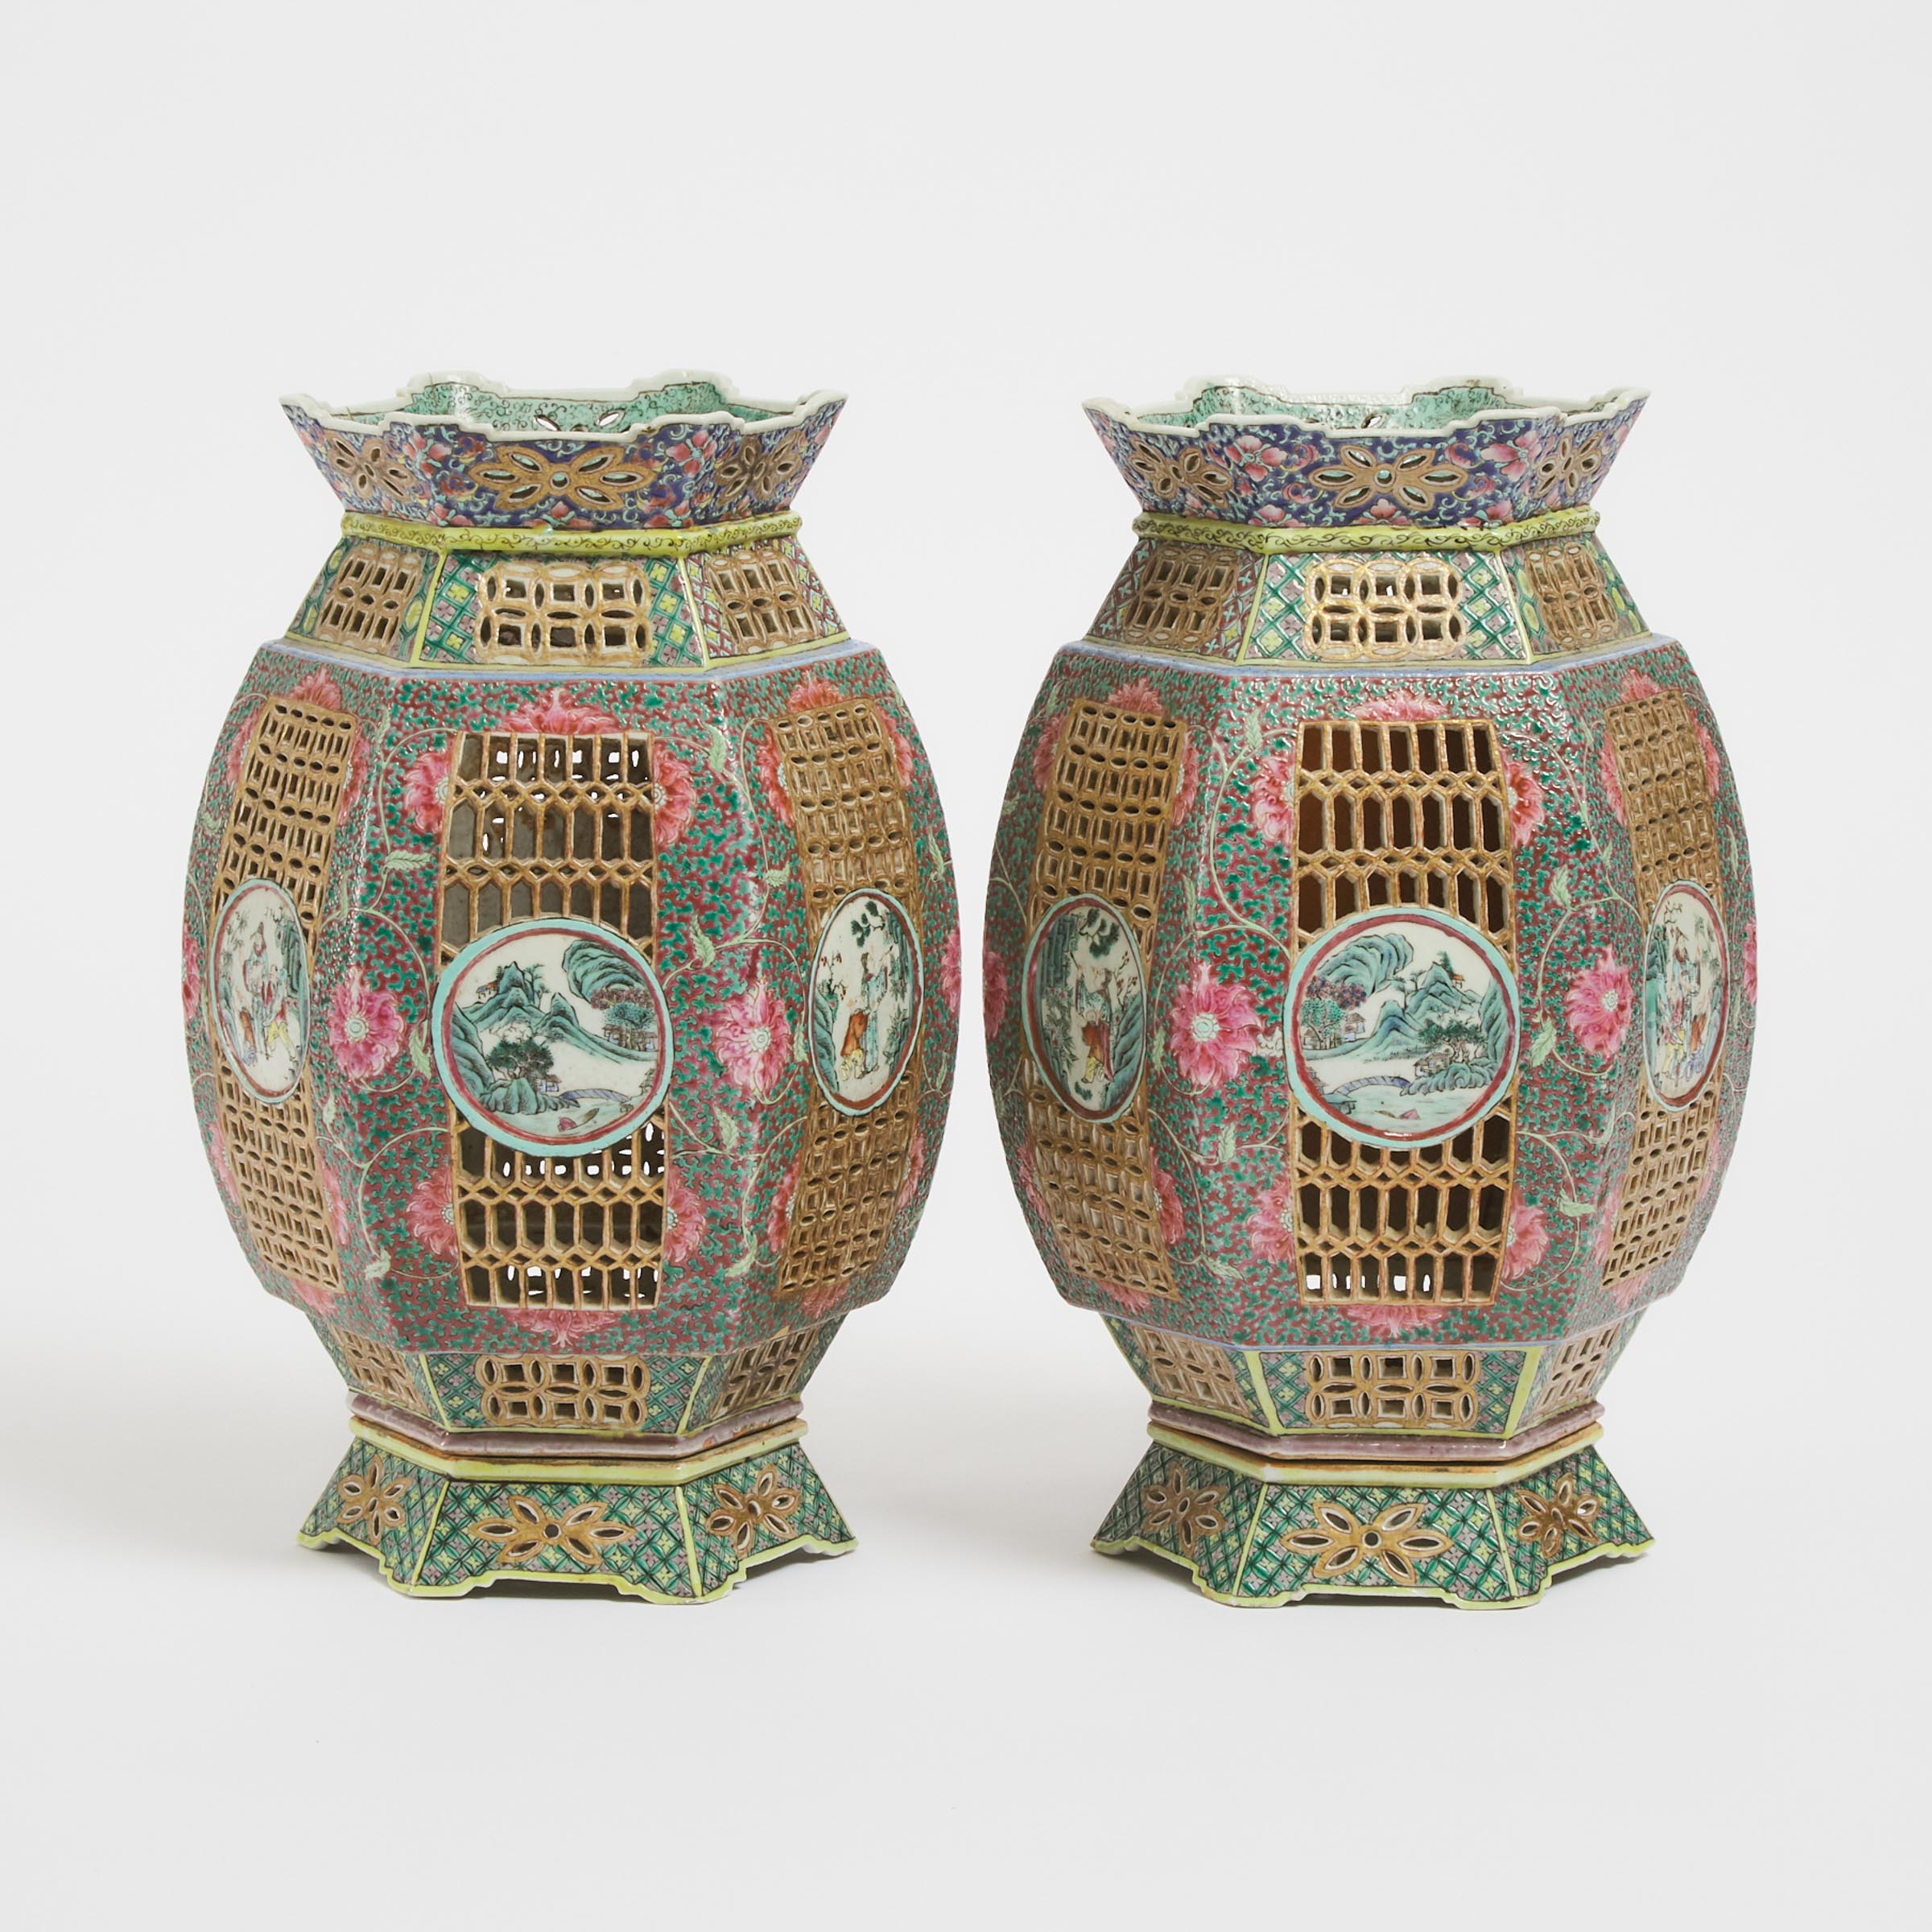 A Pair of Chinese Export Canton Famille Rose Reticulated Lanterns and Stands, Early 19th Century